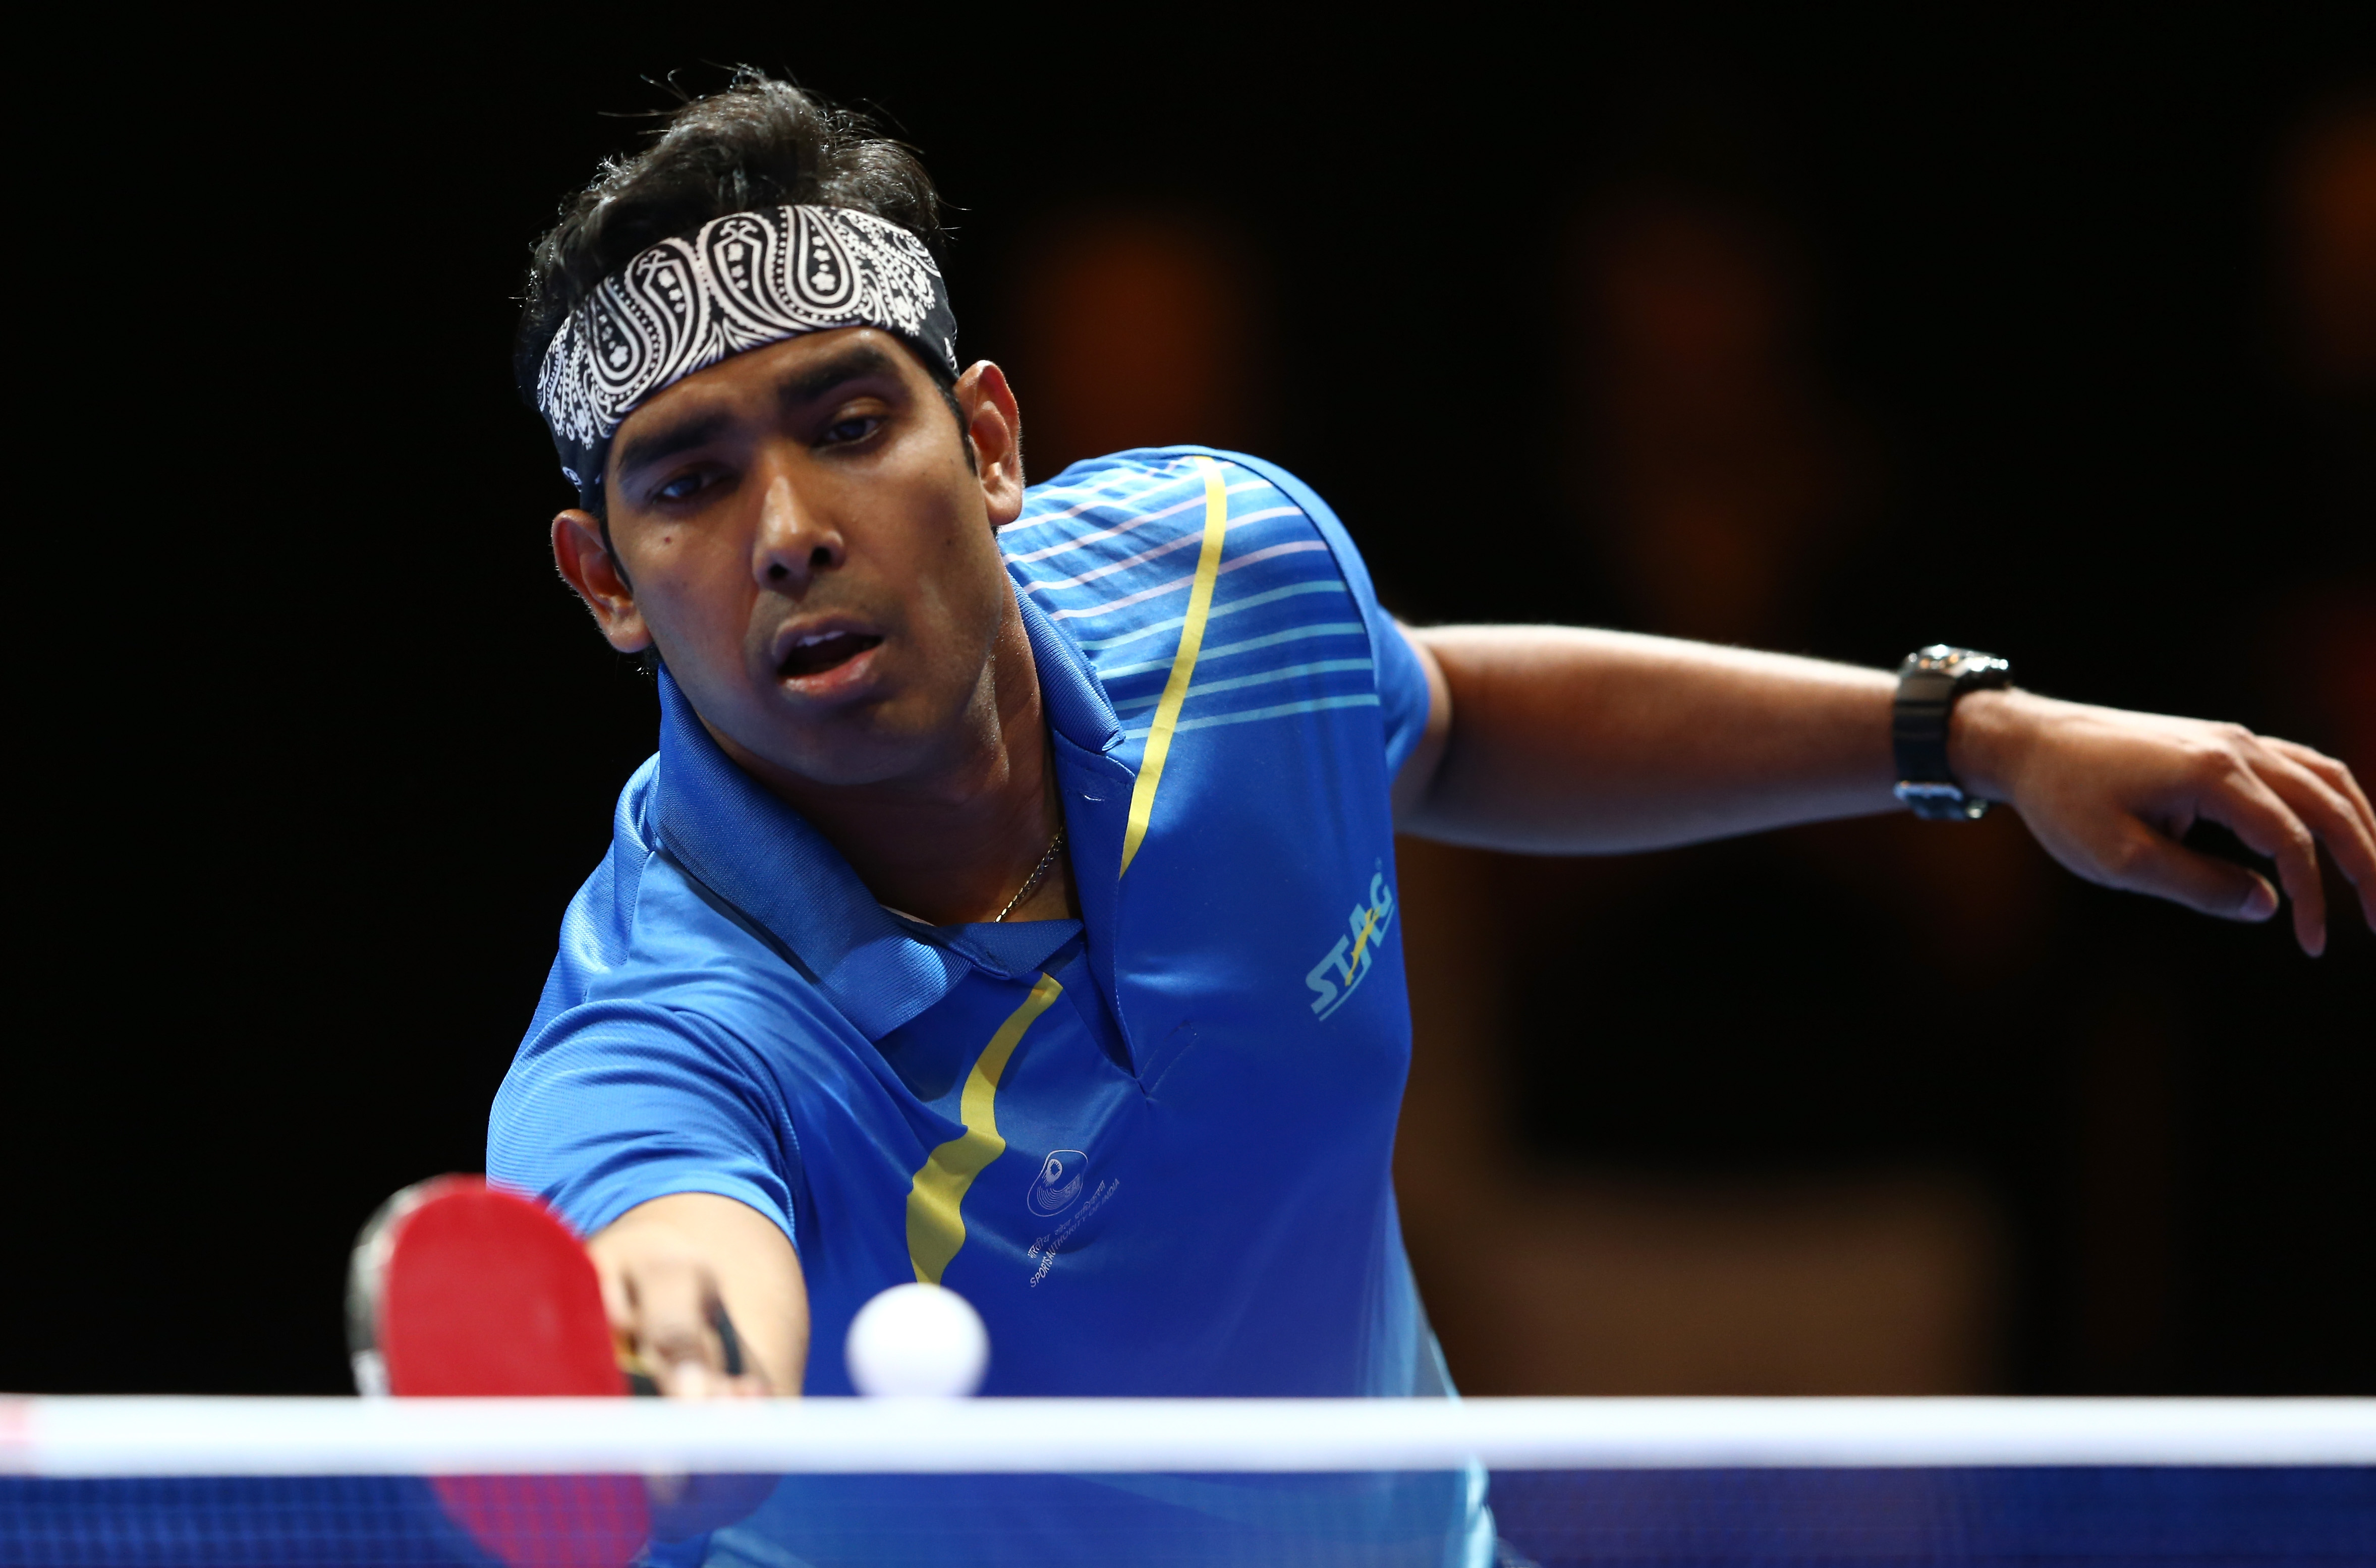 2021 Tokyo Olympics | An Olympic medal can lift the stature of Table Tennis in India, asserts Sharath Kamal